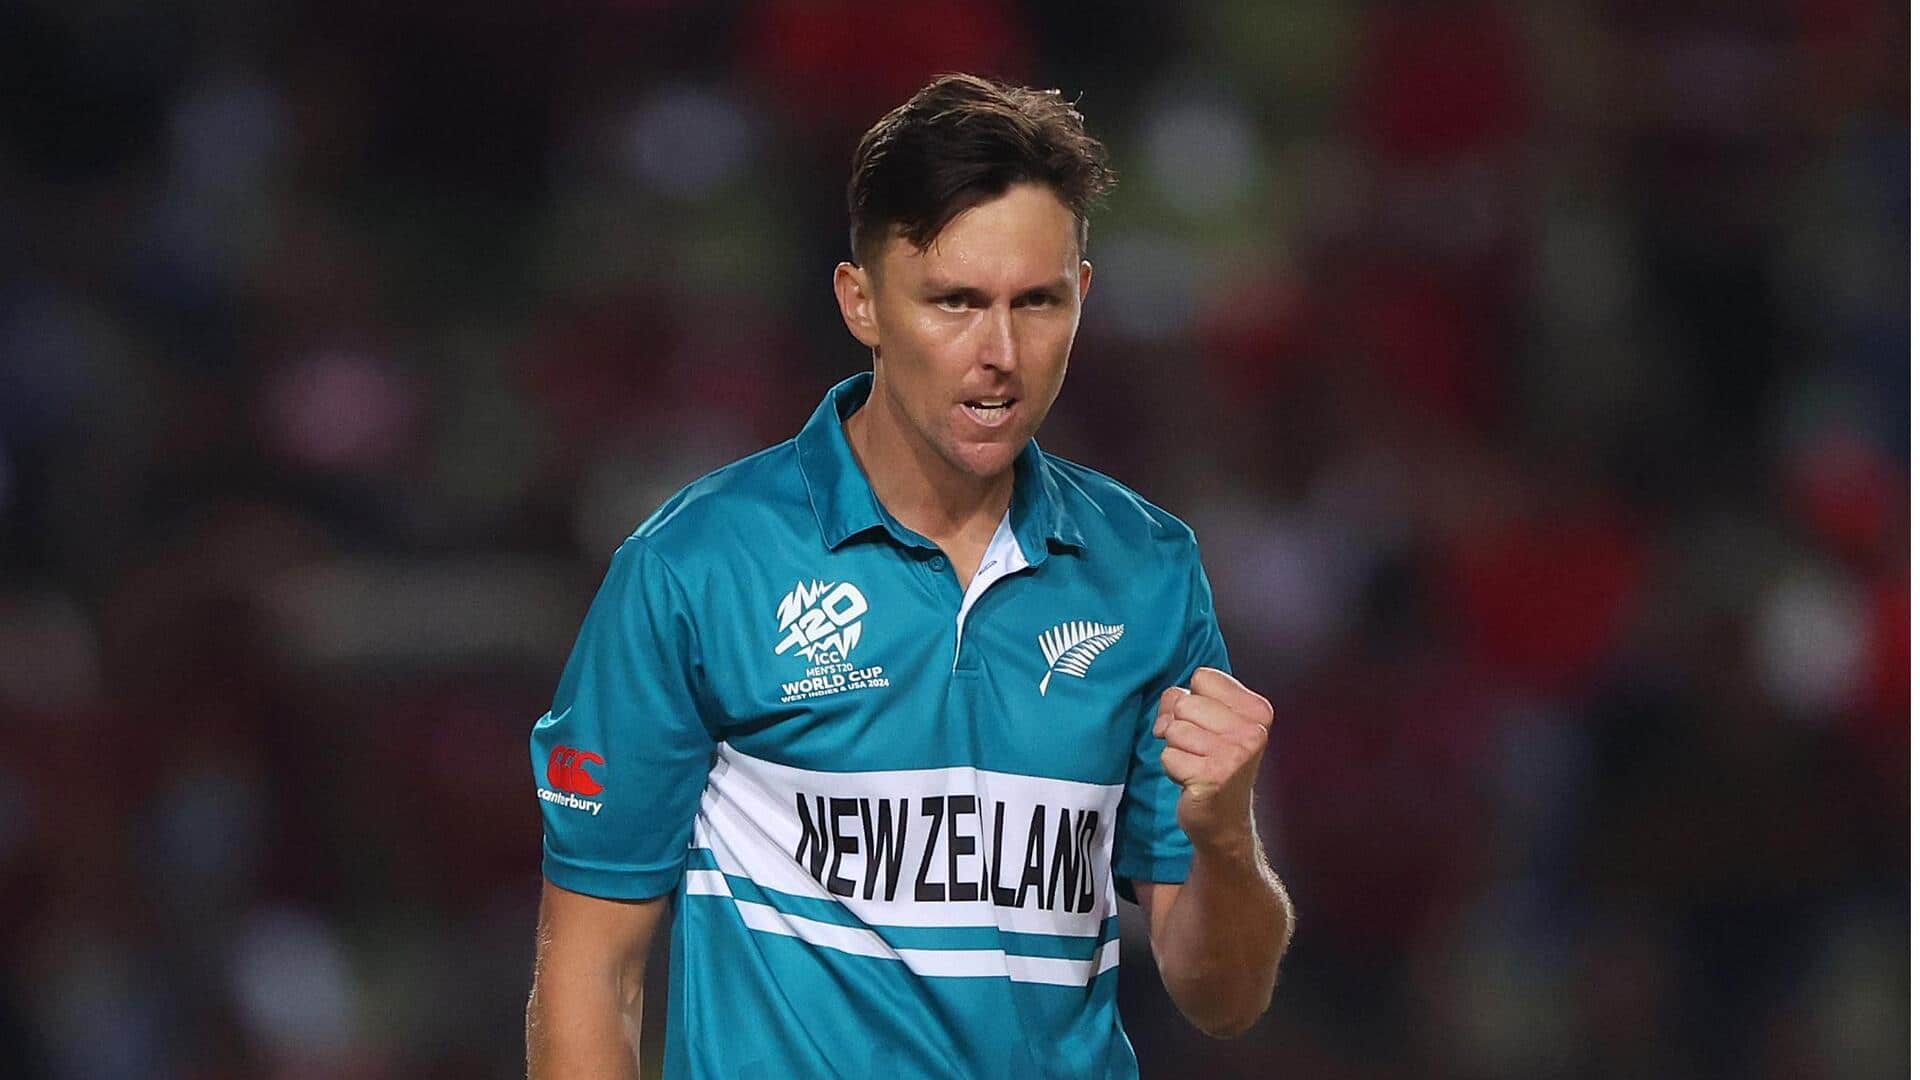 Boult, Motie star with three-fers in WI-NZ T20 WC clash